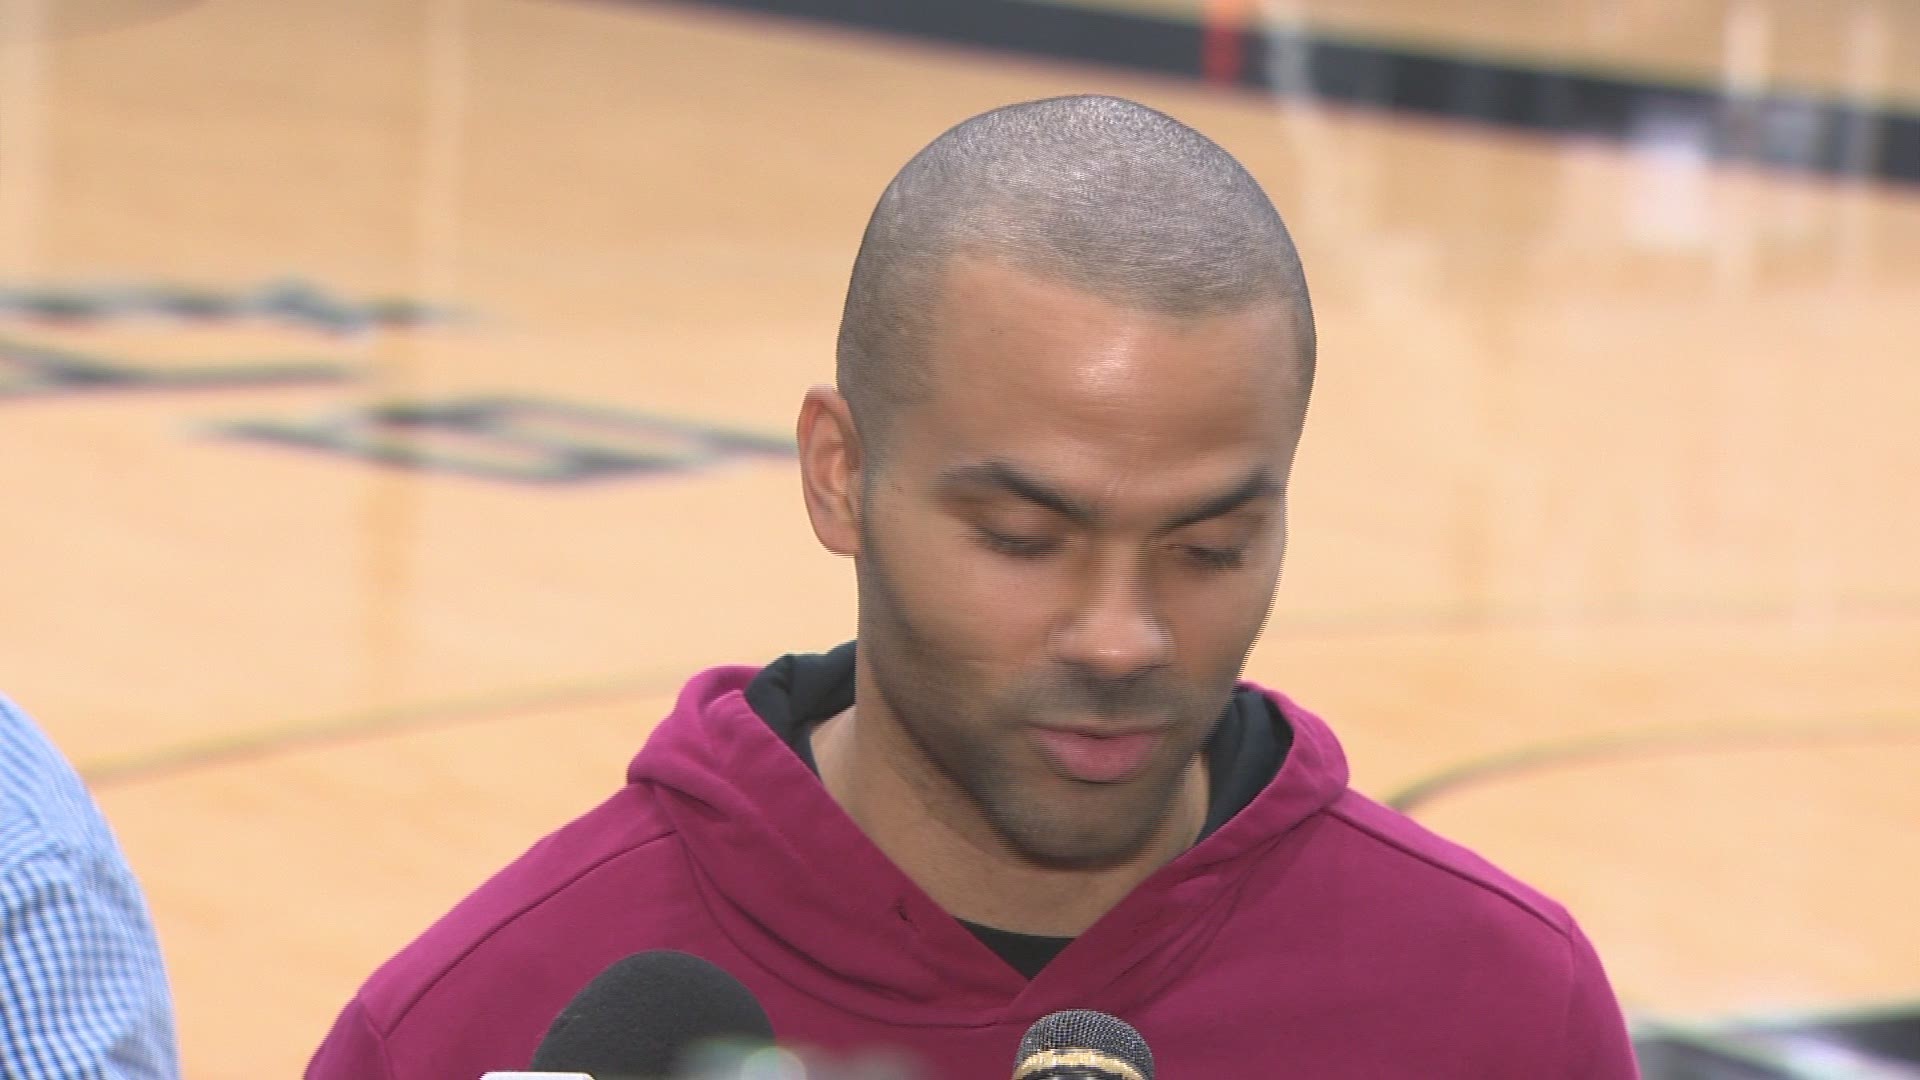 Spurs point guard Tony Parker speaks to the media after the Spurs shootaround on Thursday, April 19.